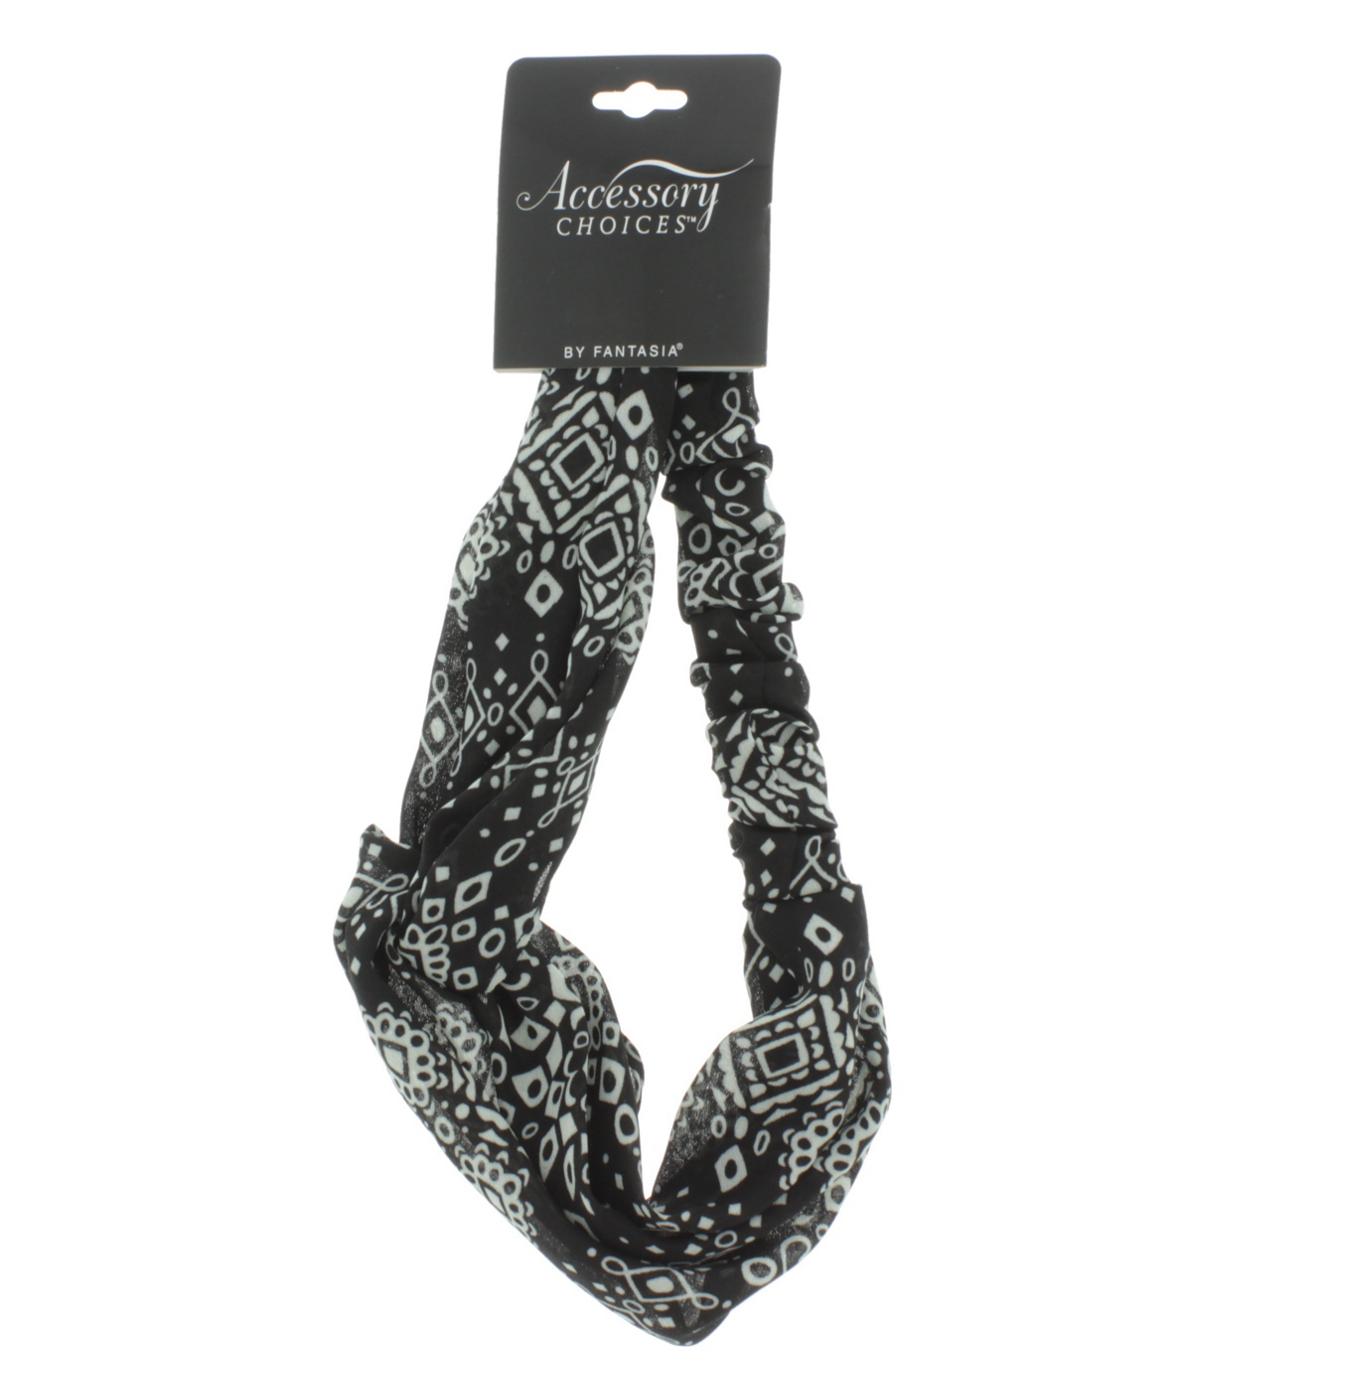 Accessory Choices Black & White Floral Twist Front Headwrap, Assorted Colors; image 1 of 2